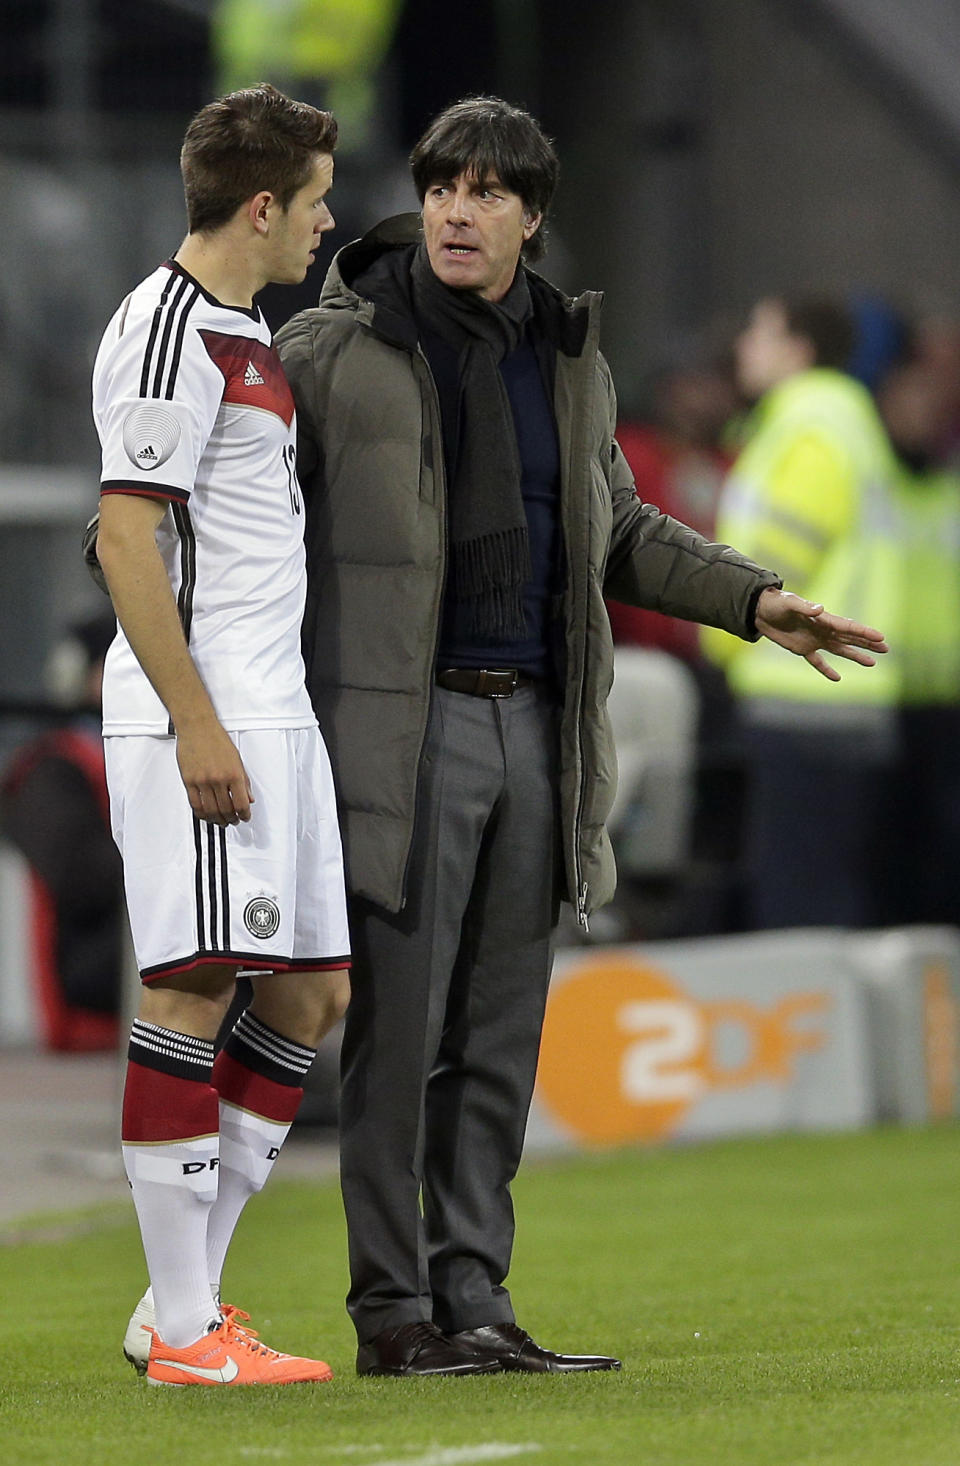 Germany's head coach Joachim Loew, right, talks to Germany's Christian Guenter, left, during a friendly soccer match between Germany and Poland in Hamburg, Germany, Tuesday, May 13, 2014. (AP Photo/Michael Sohn)